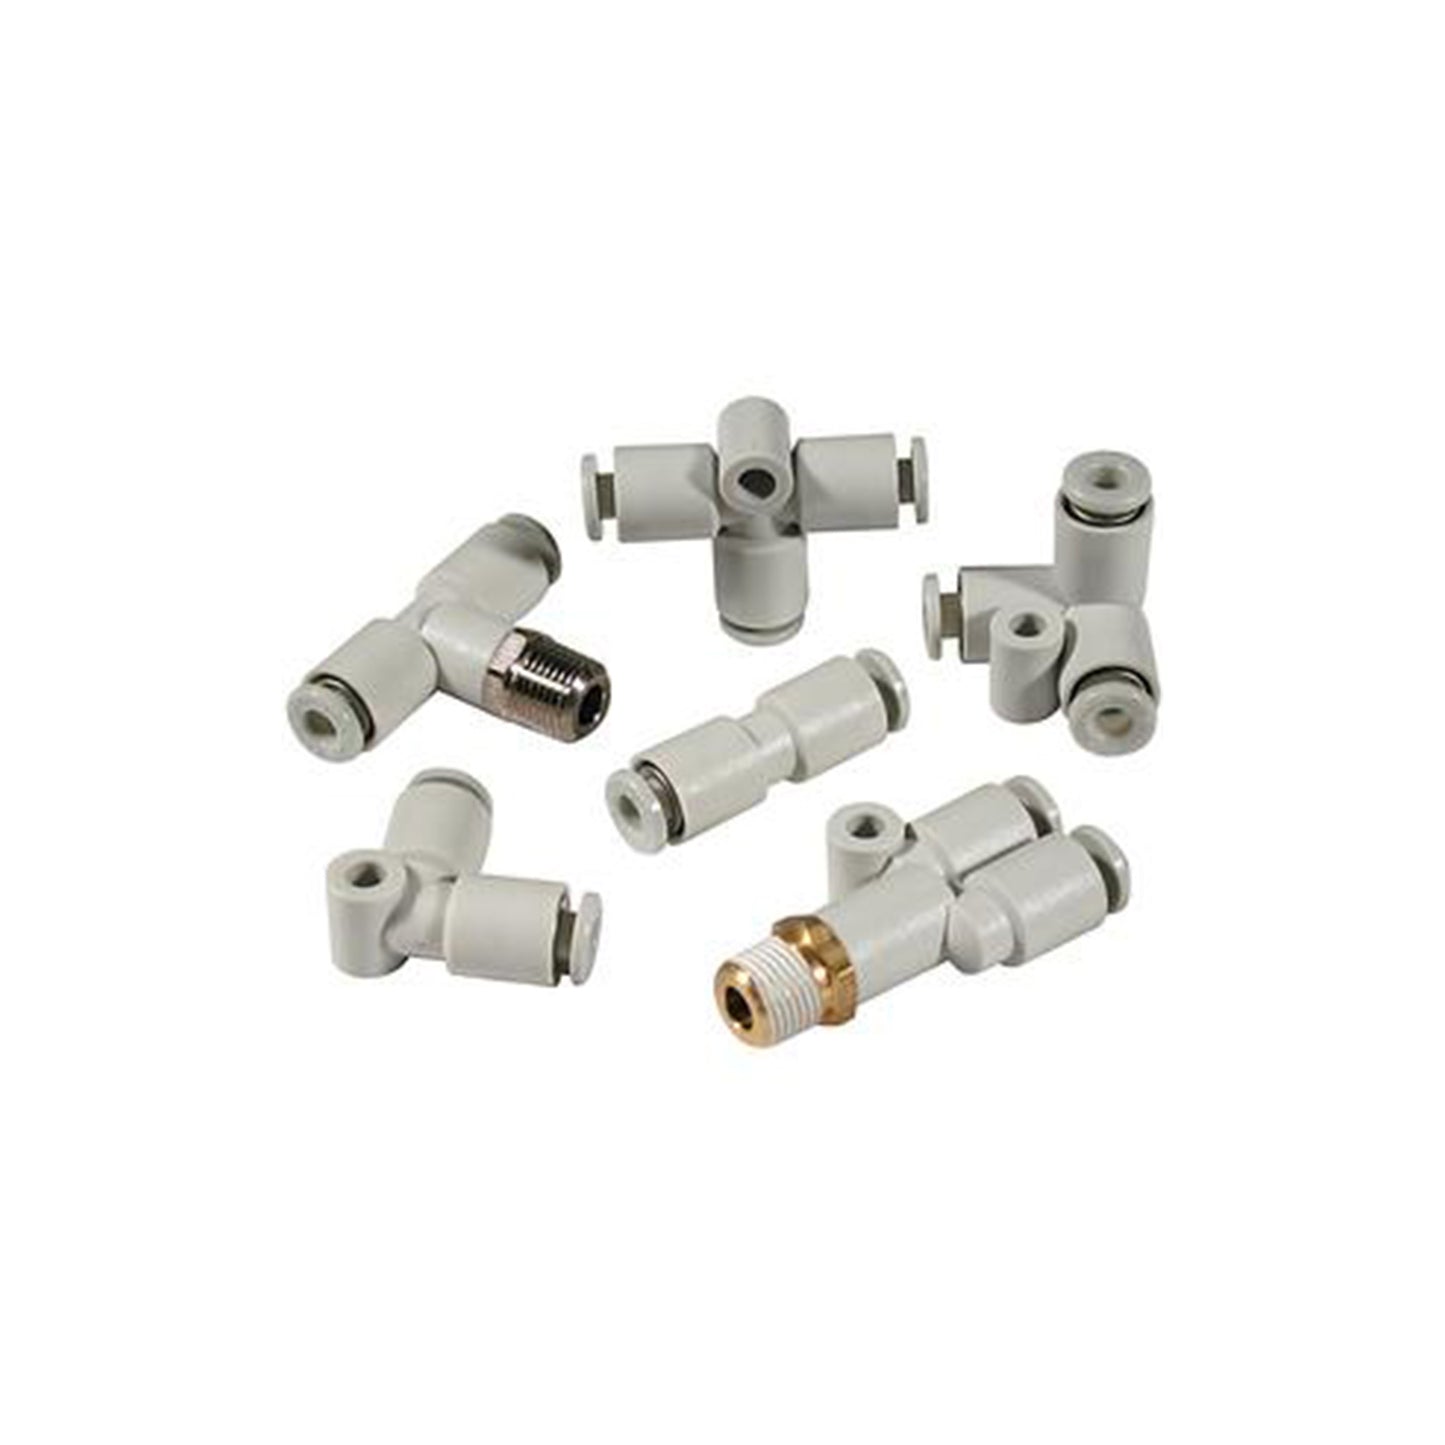 SMC KQ2H06-U03 | Unifit Male Connector Fitting